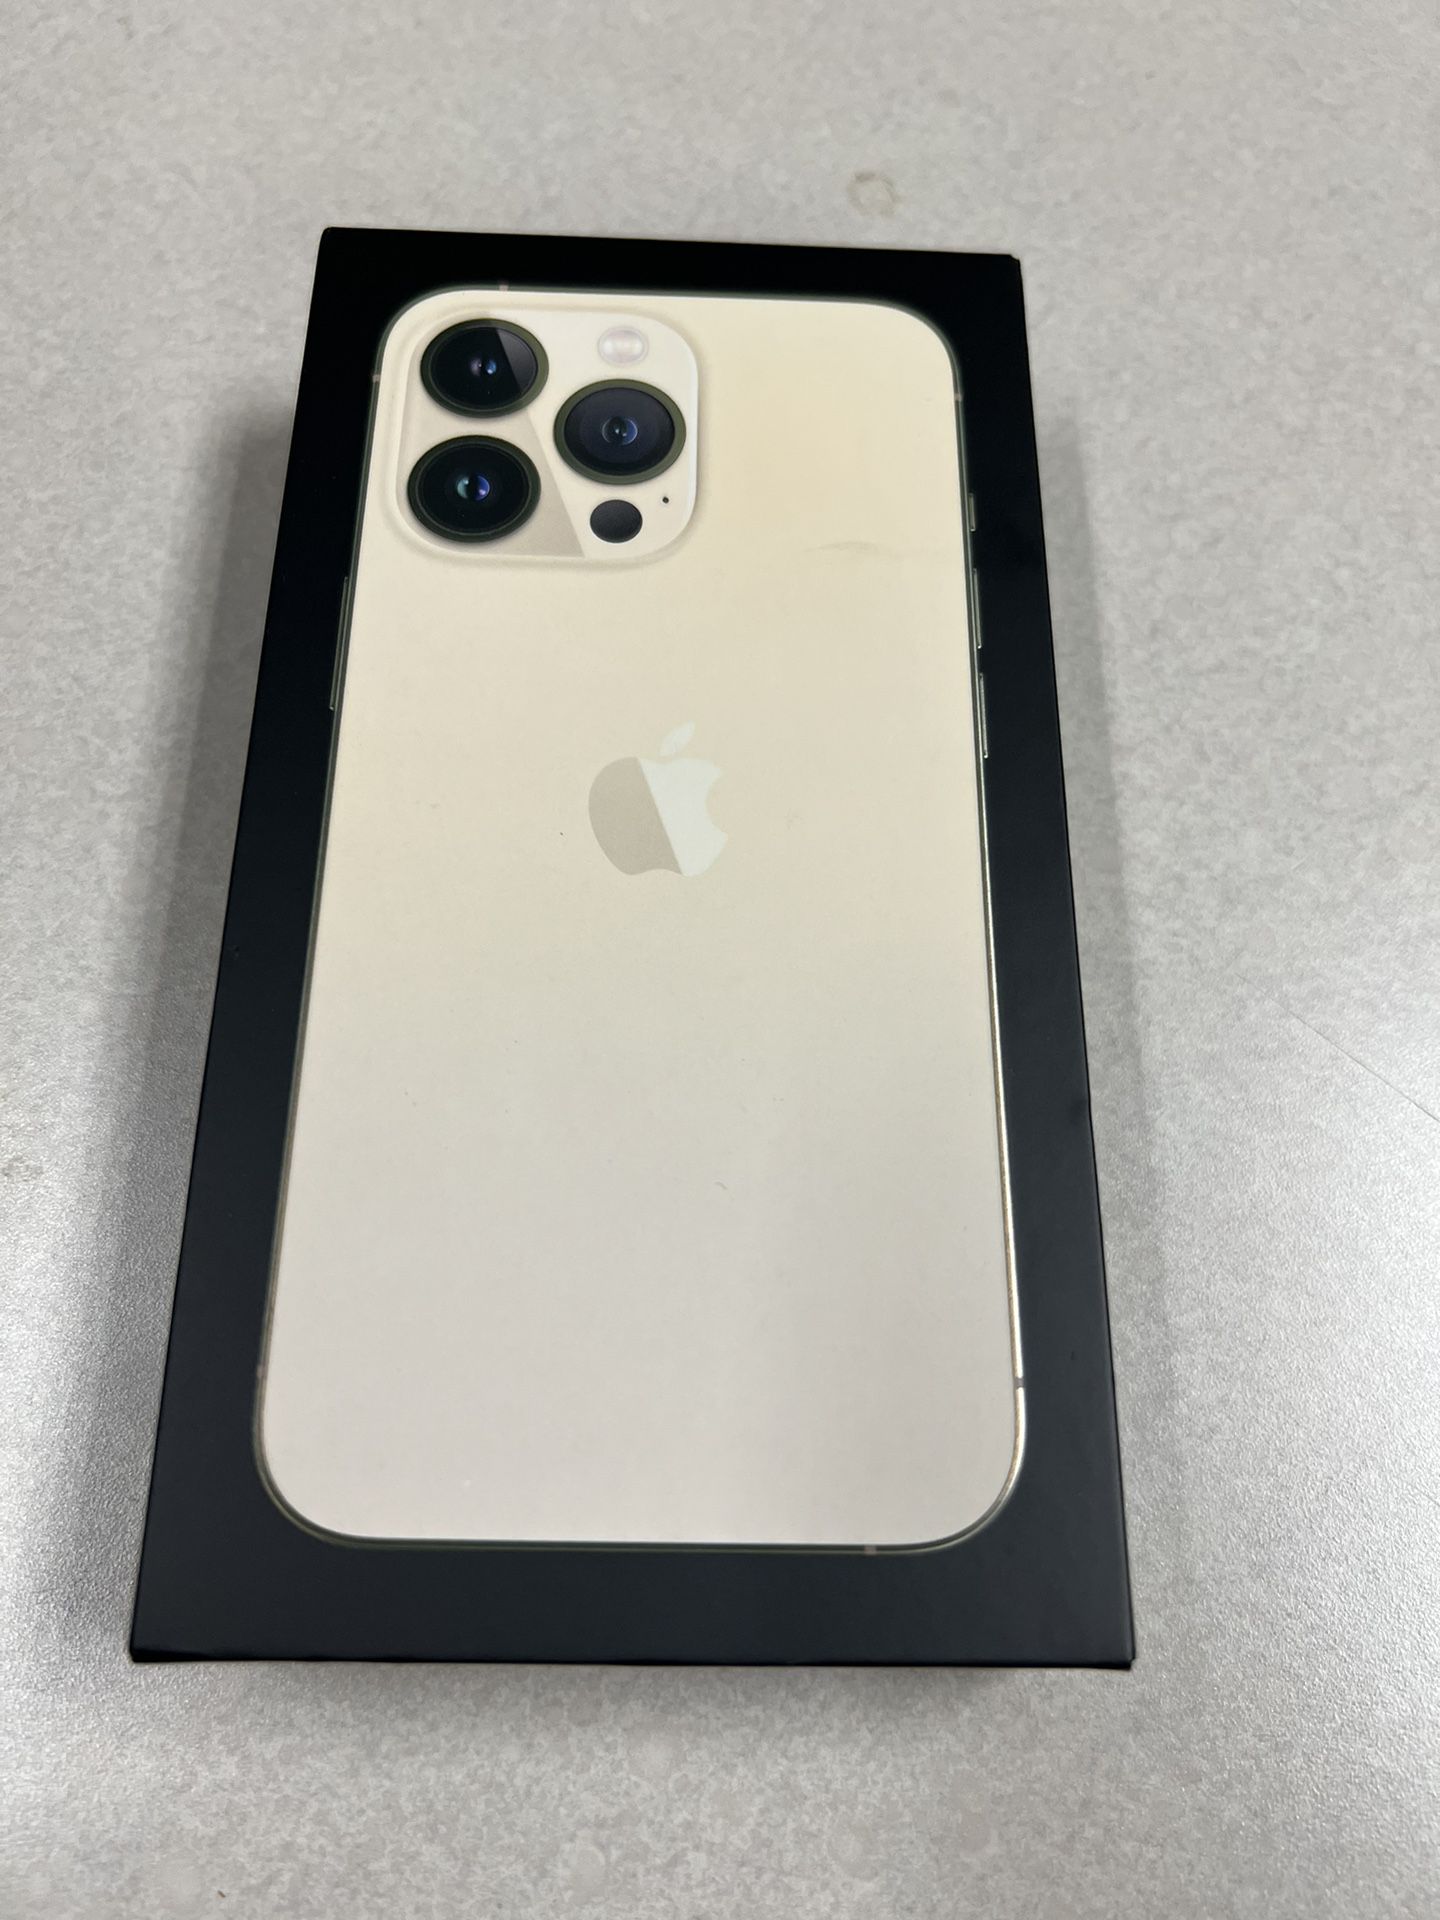 IPHONE 13 PRO MAX UNLOCKED FOR ALL CARRIERS 512GB for Sale in Louisville, KY  - OfferUp